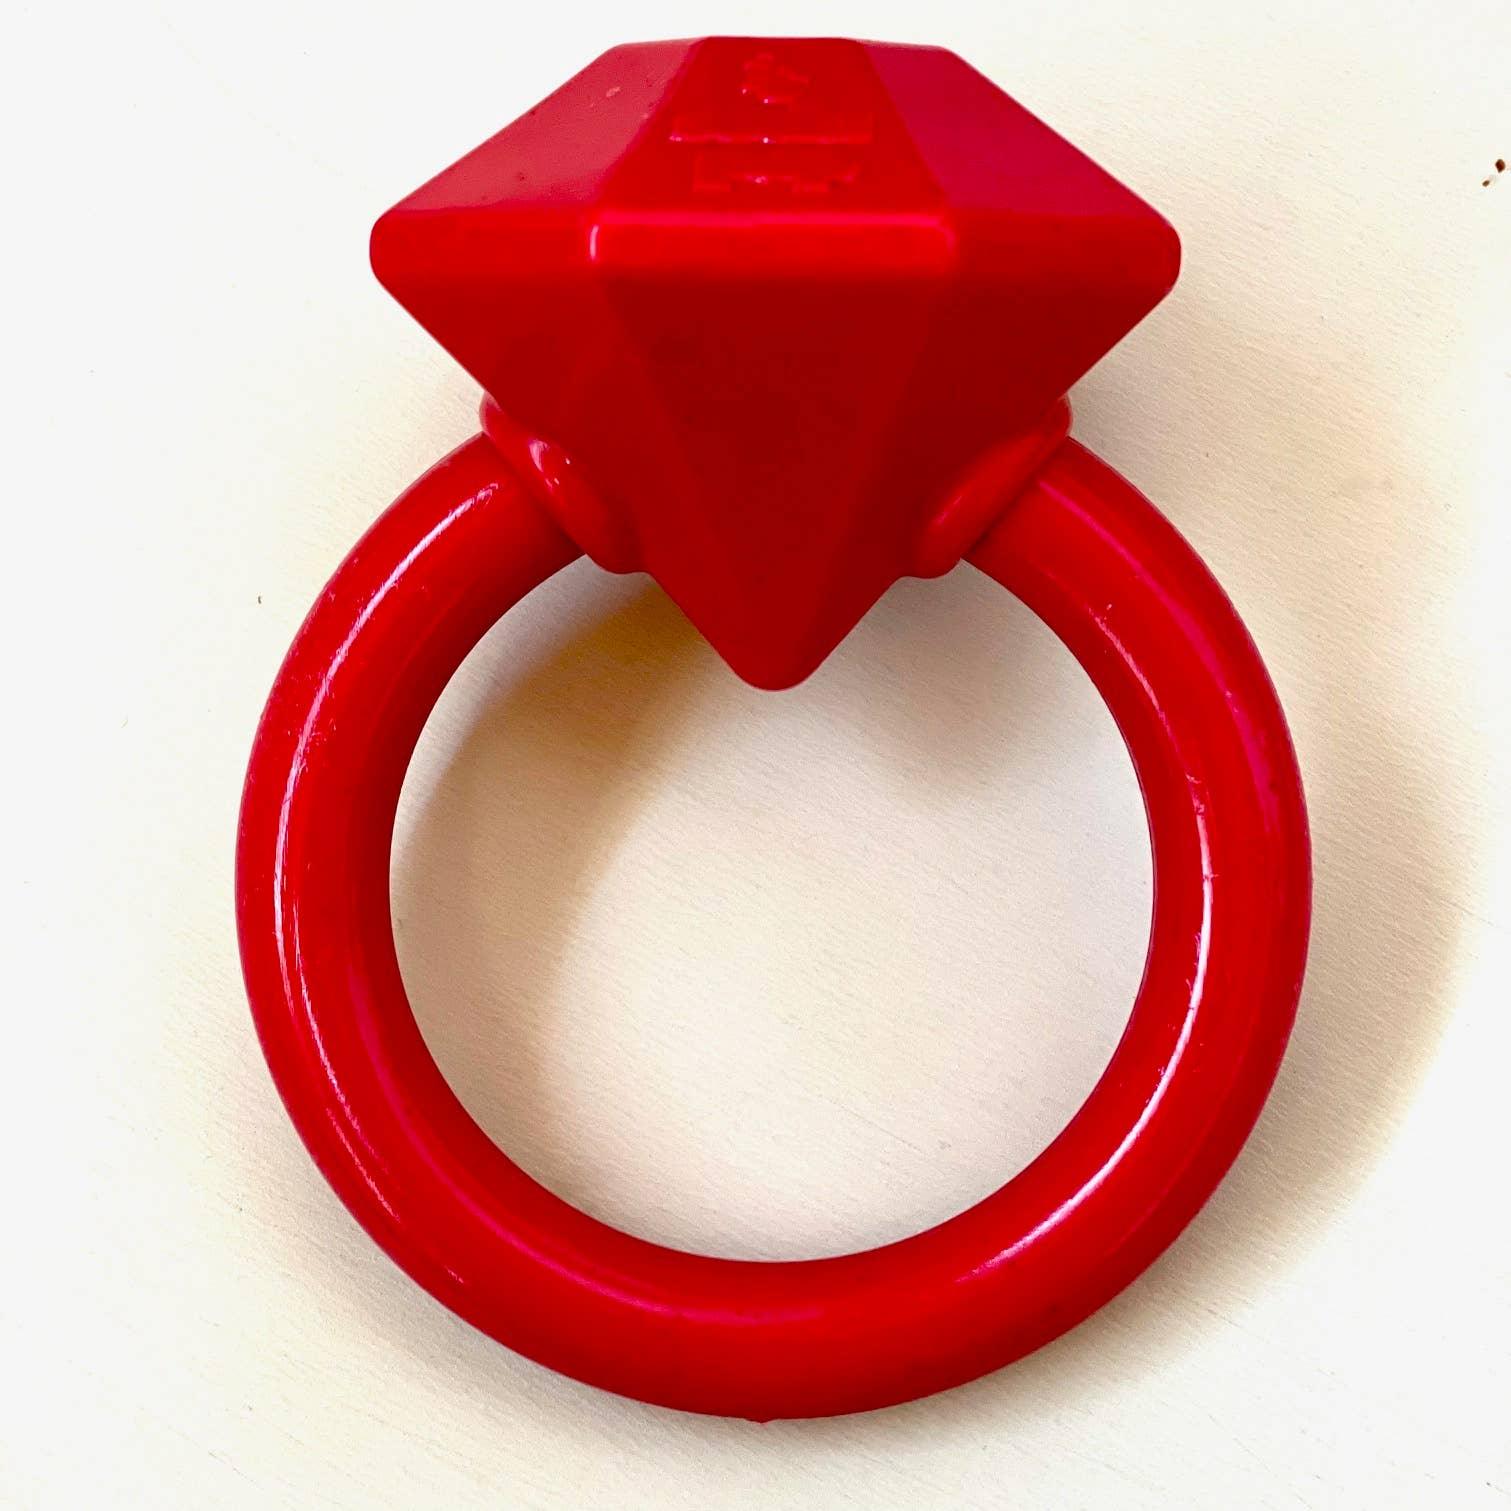 Diamond Ring Durable Nylon Teething Ring for Puppies - Rocky & Maggie's Pet Boutique and Salon